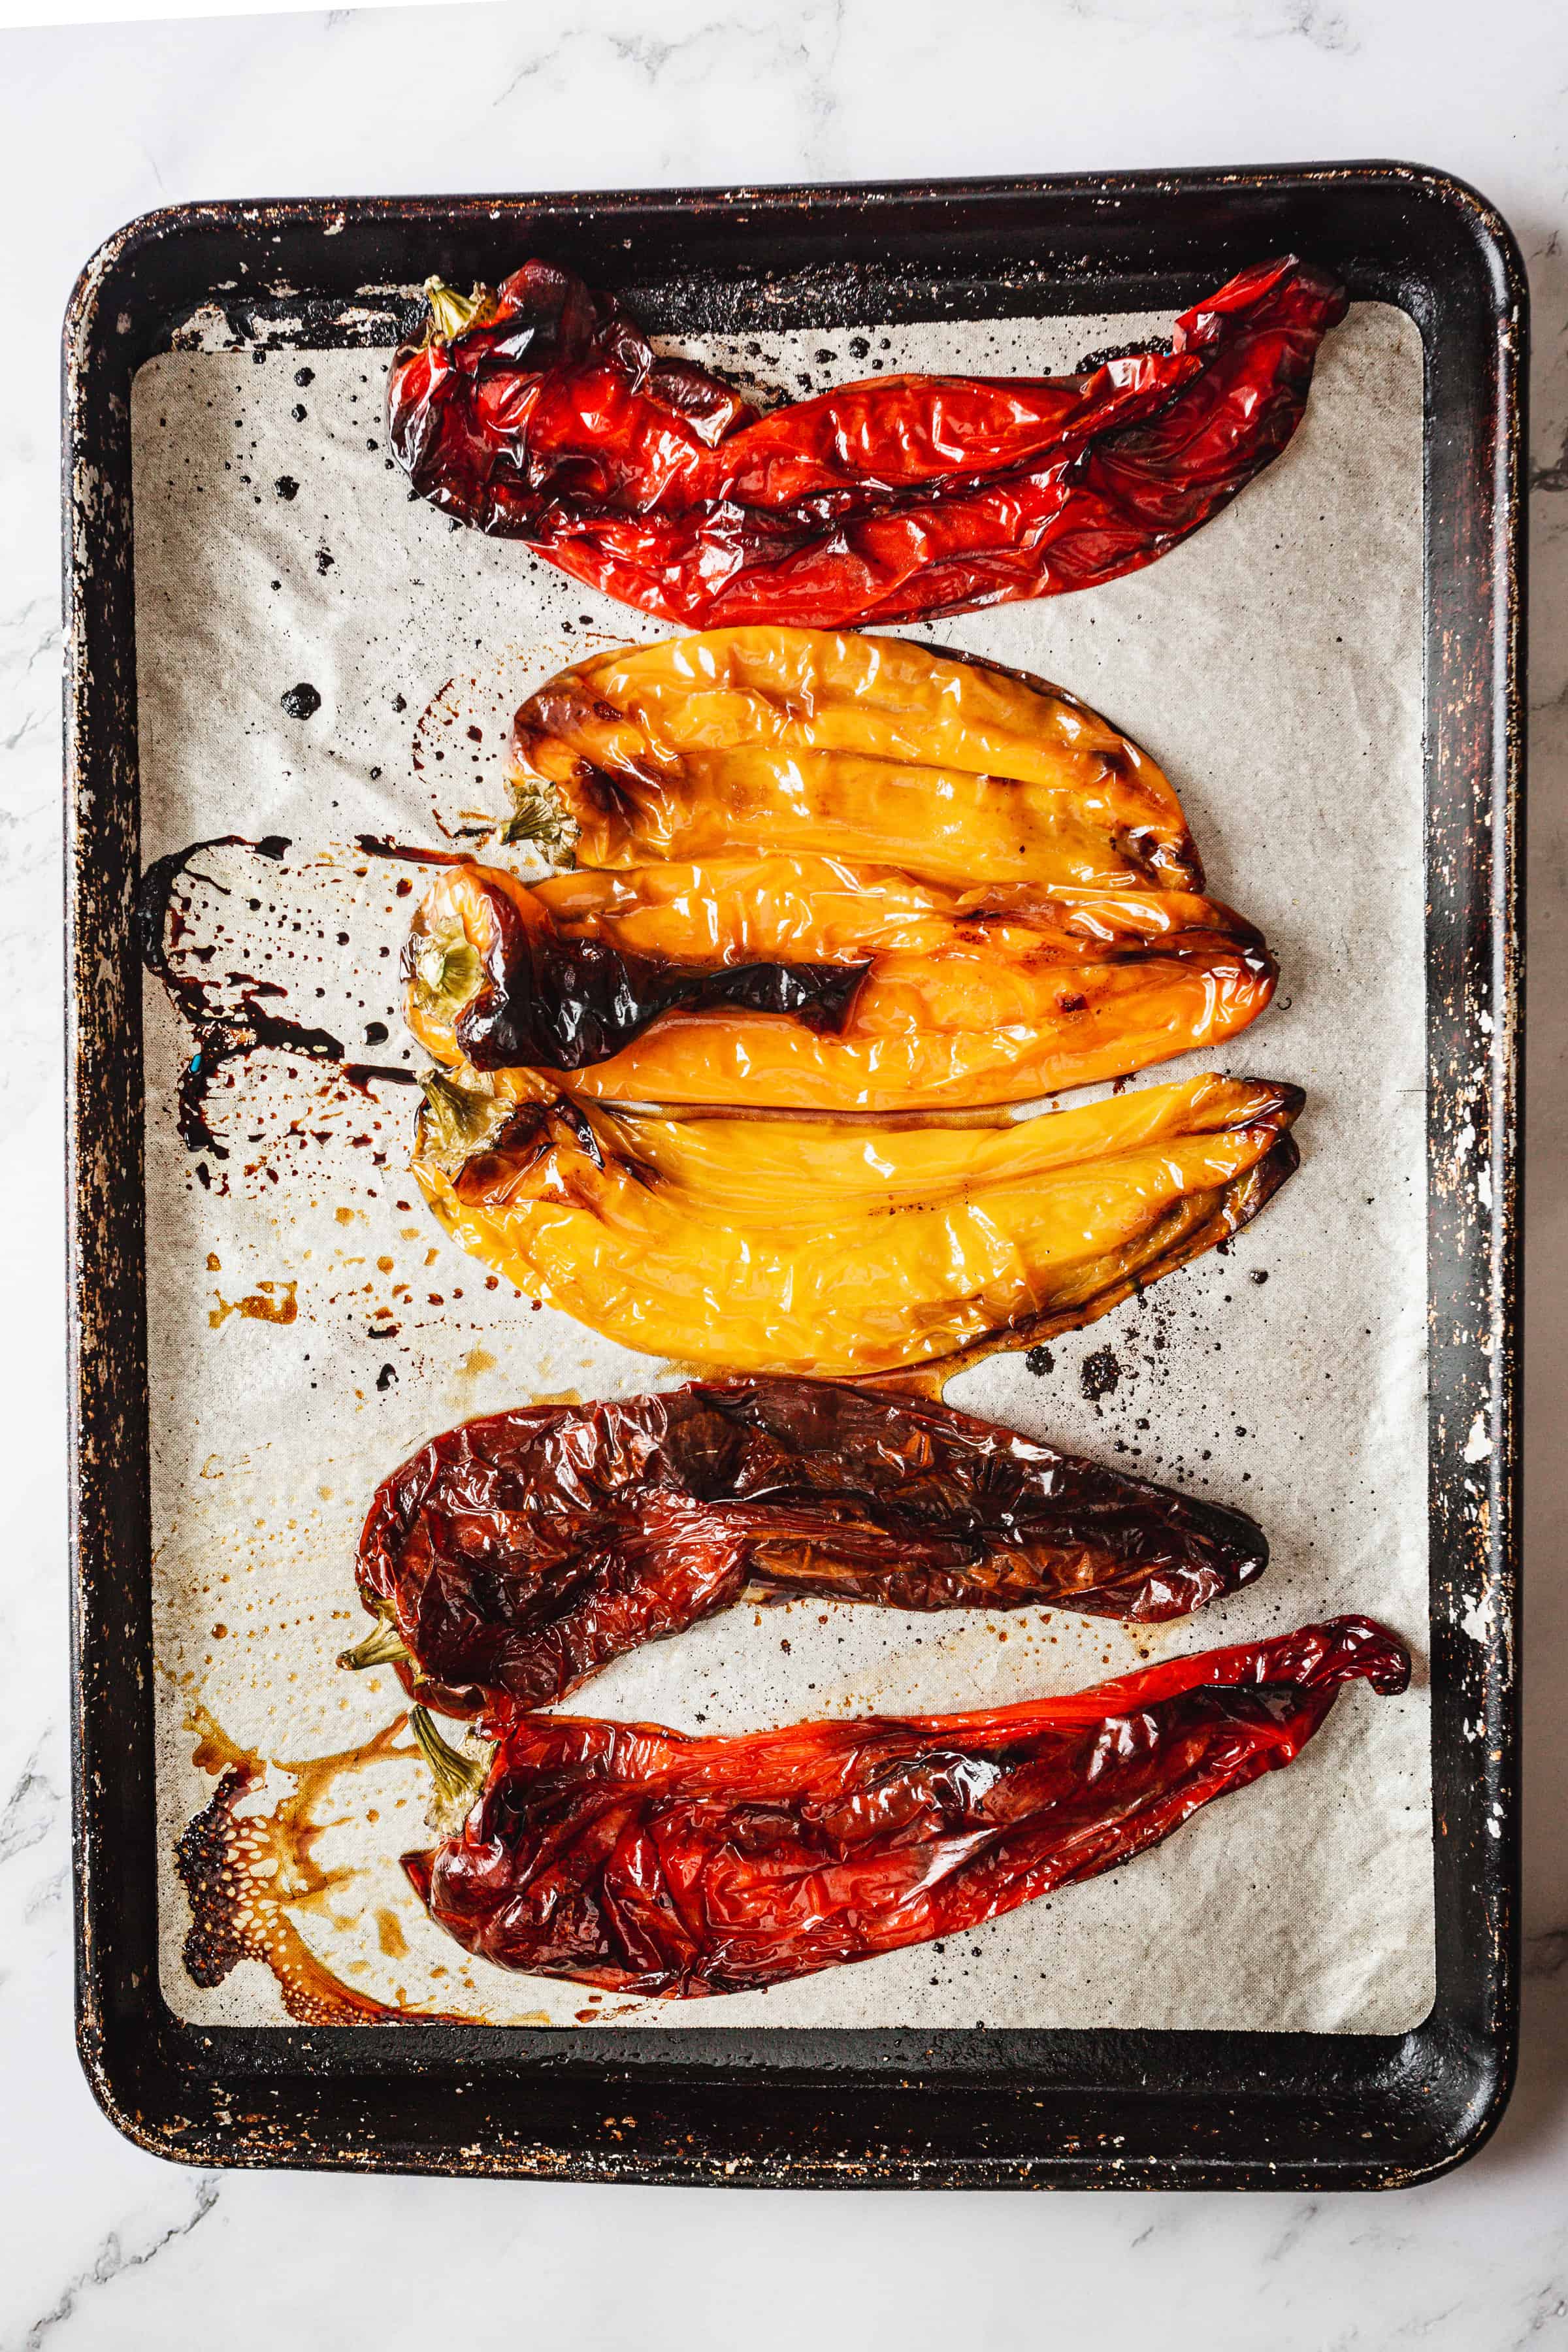 Roasted yellow and red bell peppers on a baking sheet covered with parchment paper, showing charred skins and released juices for a bell pepper bisque.